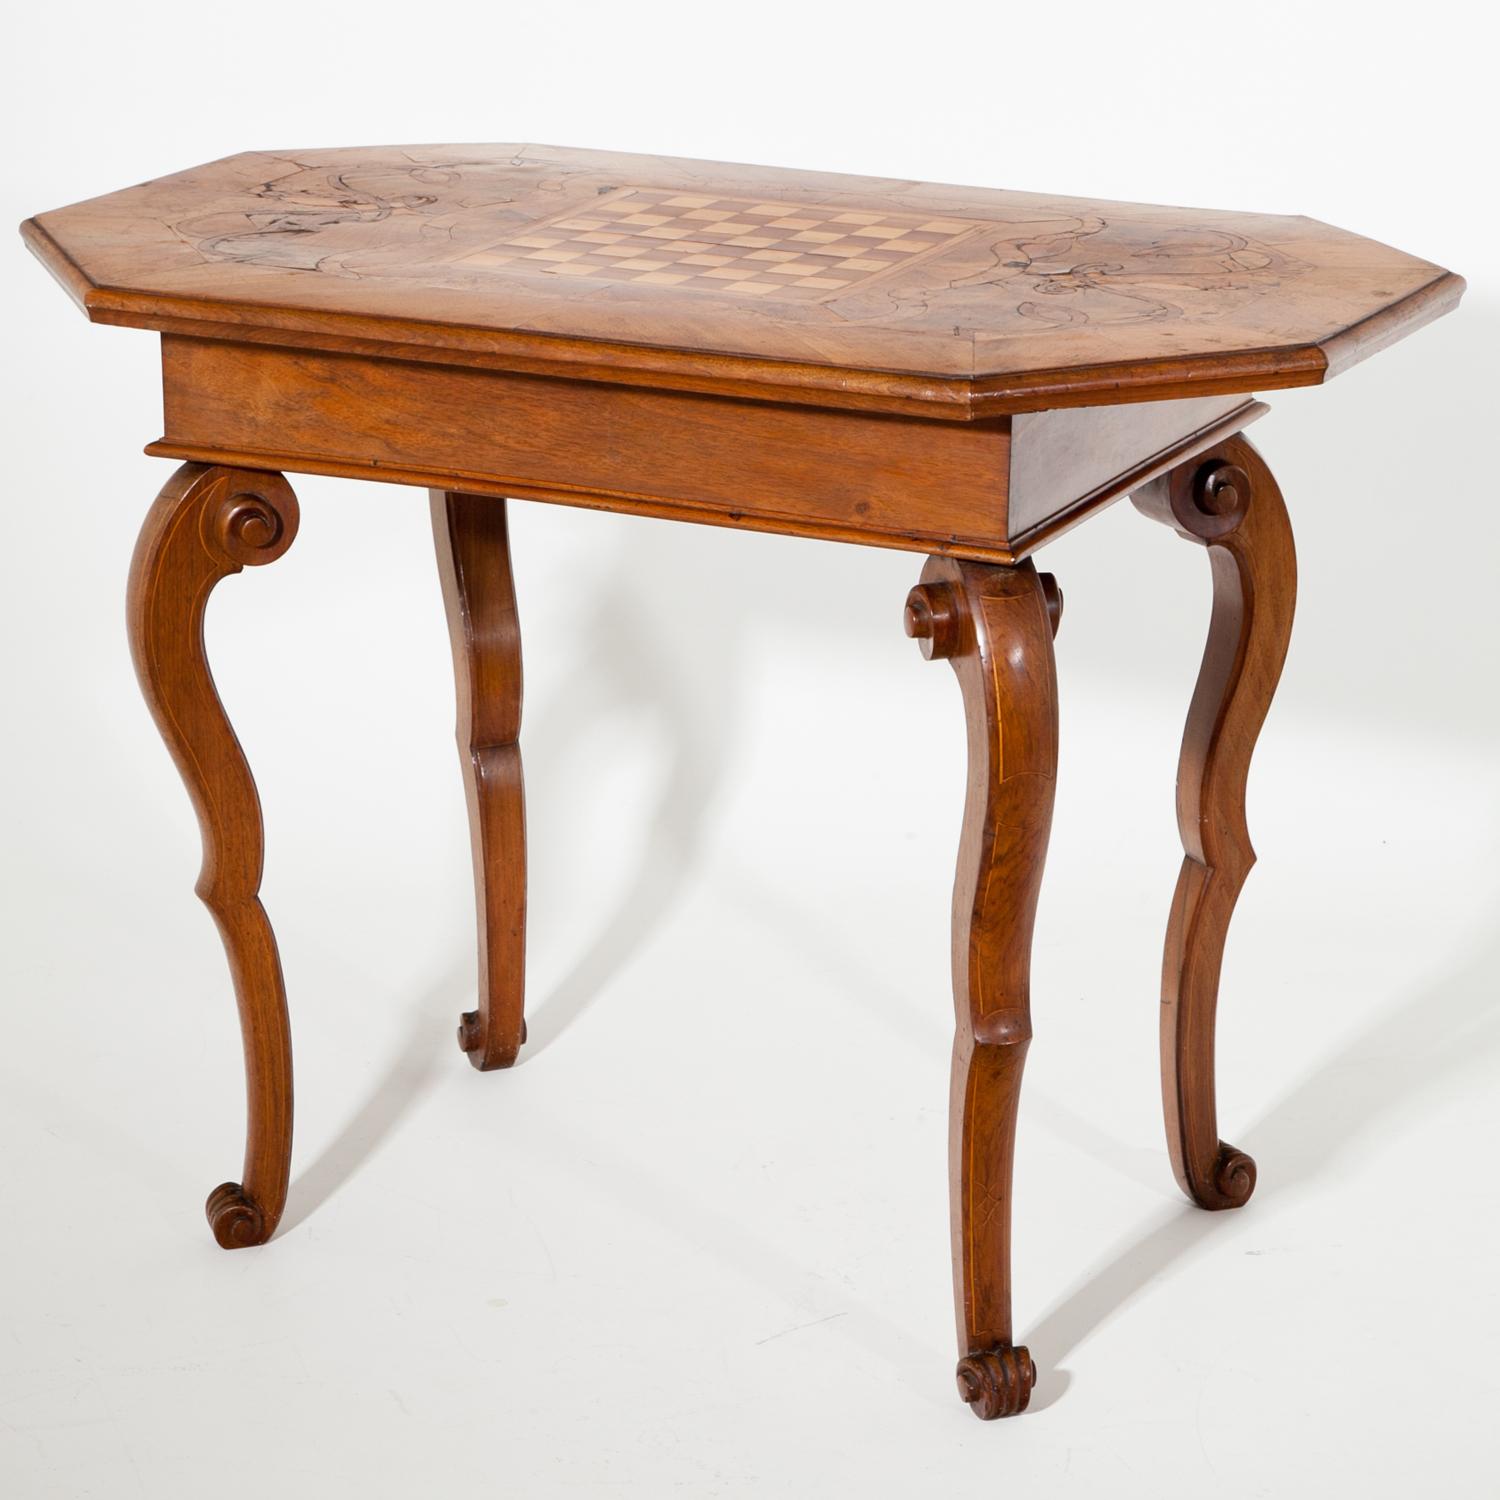 Walnut Baroque Table, Late 18th-Early 19th Century